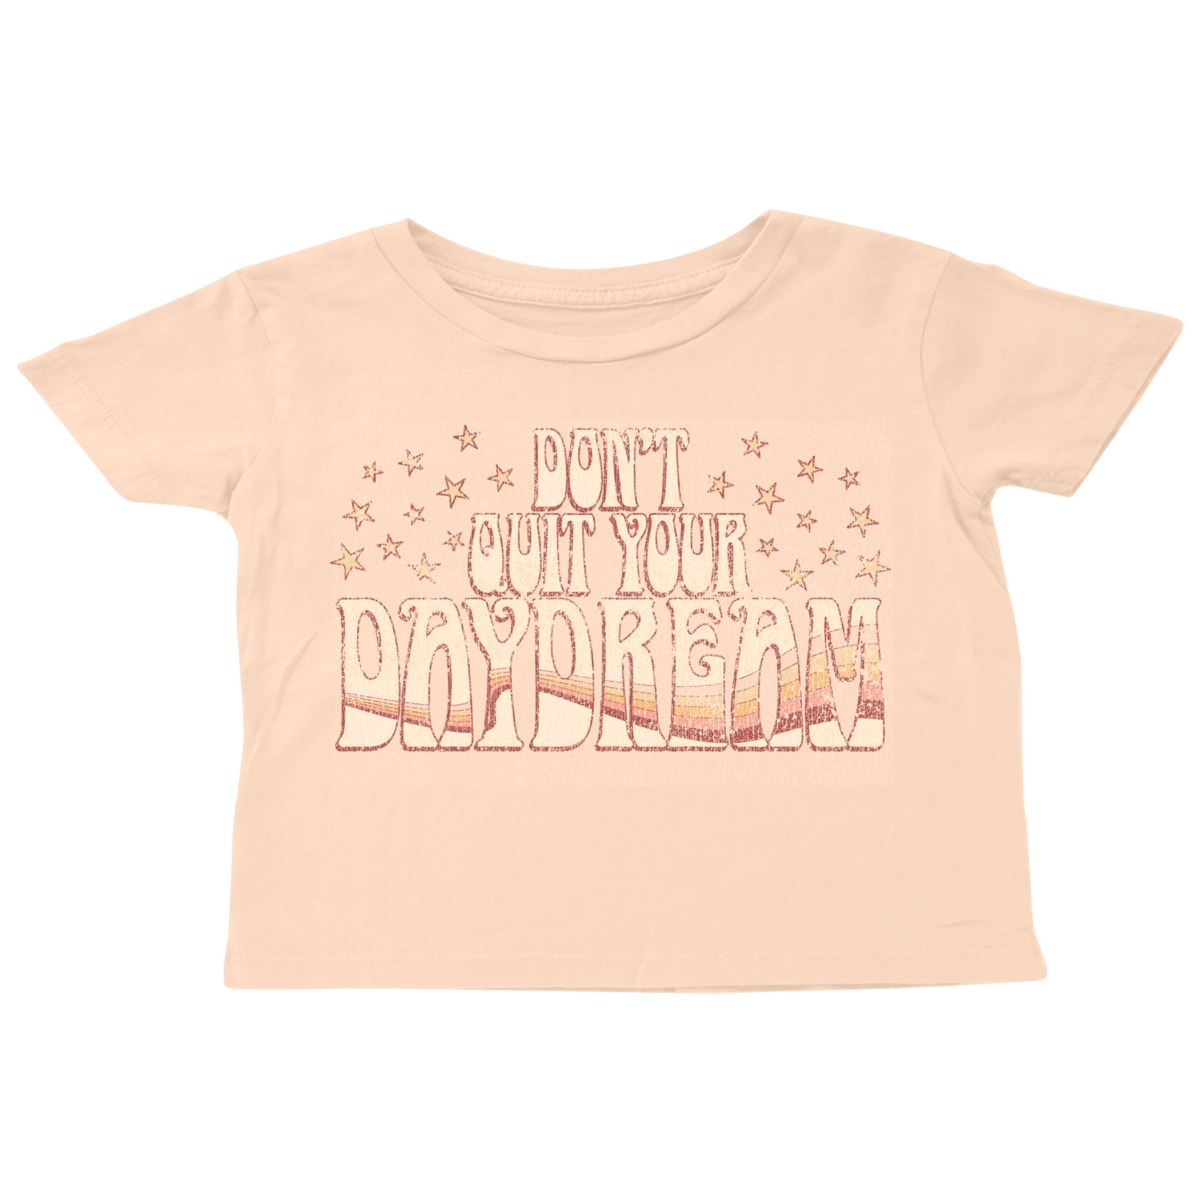 Don't Quit Your Daydream Tee 160 GIRLS APPAREL TWEEN 7-16 Tiny Whales 7 